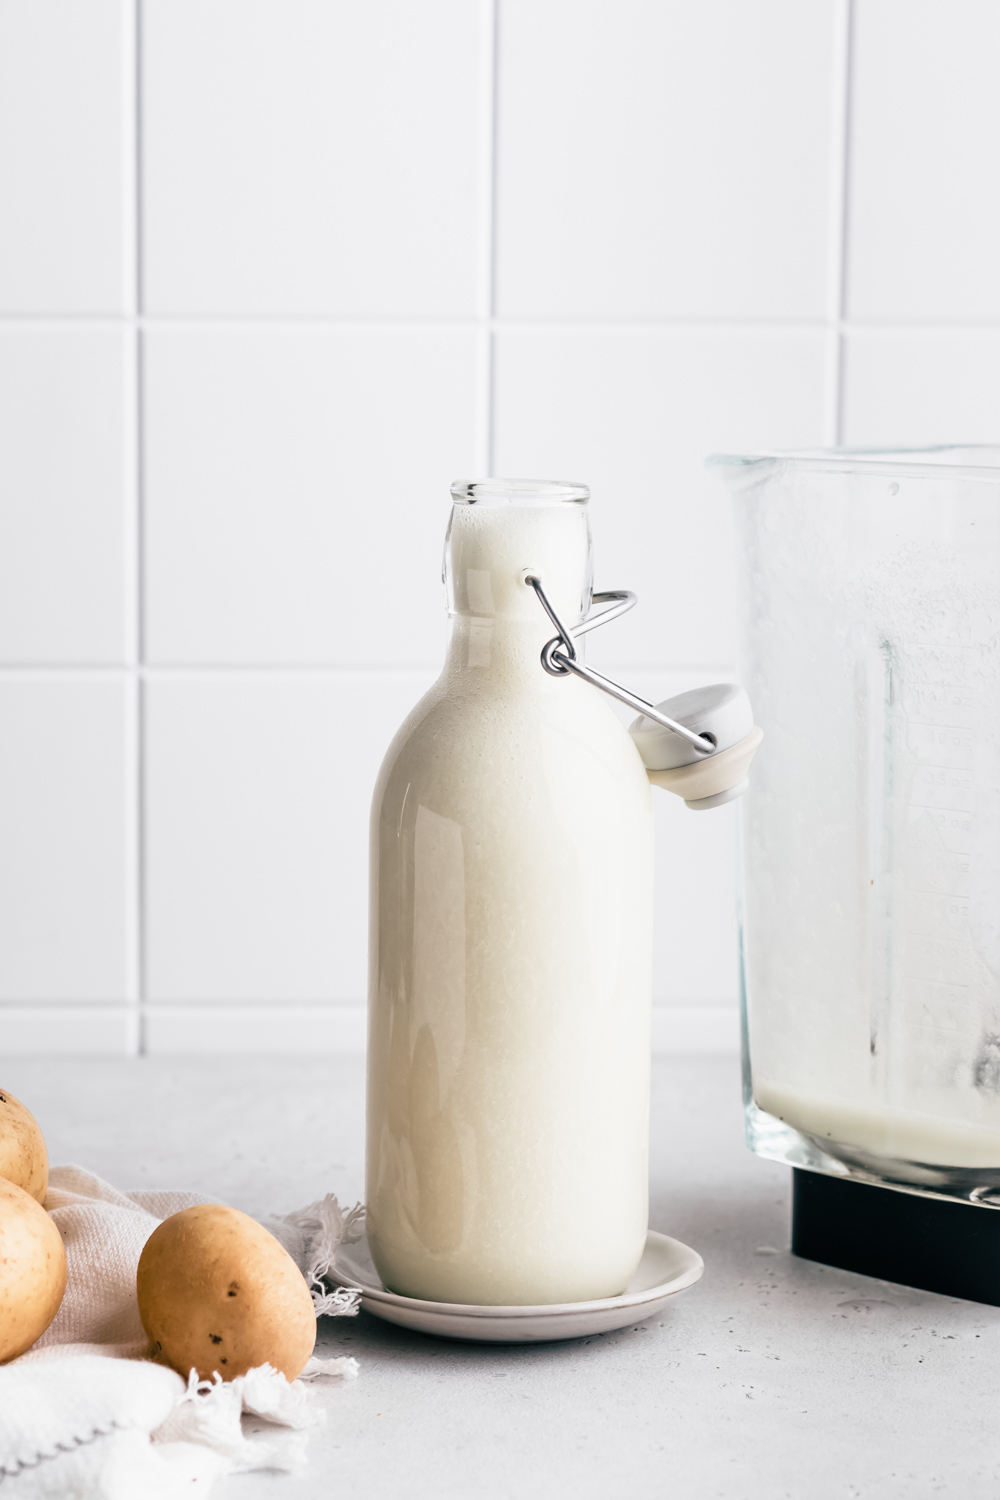 A milk bottle with potato milk next to a container from a blender with a few potatoes and a napkin and a white tile backdrop.